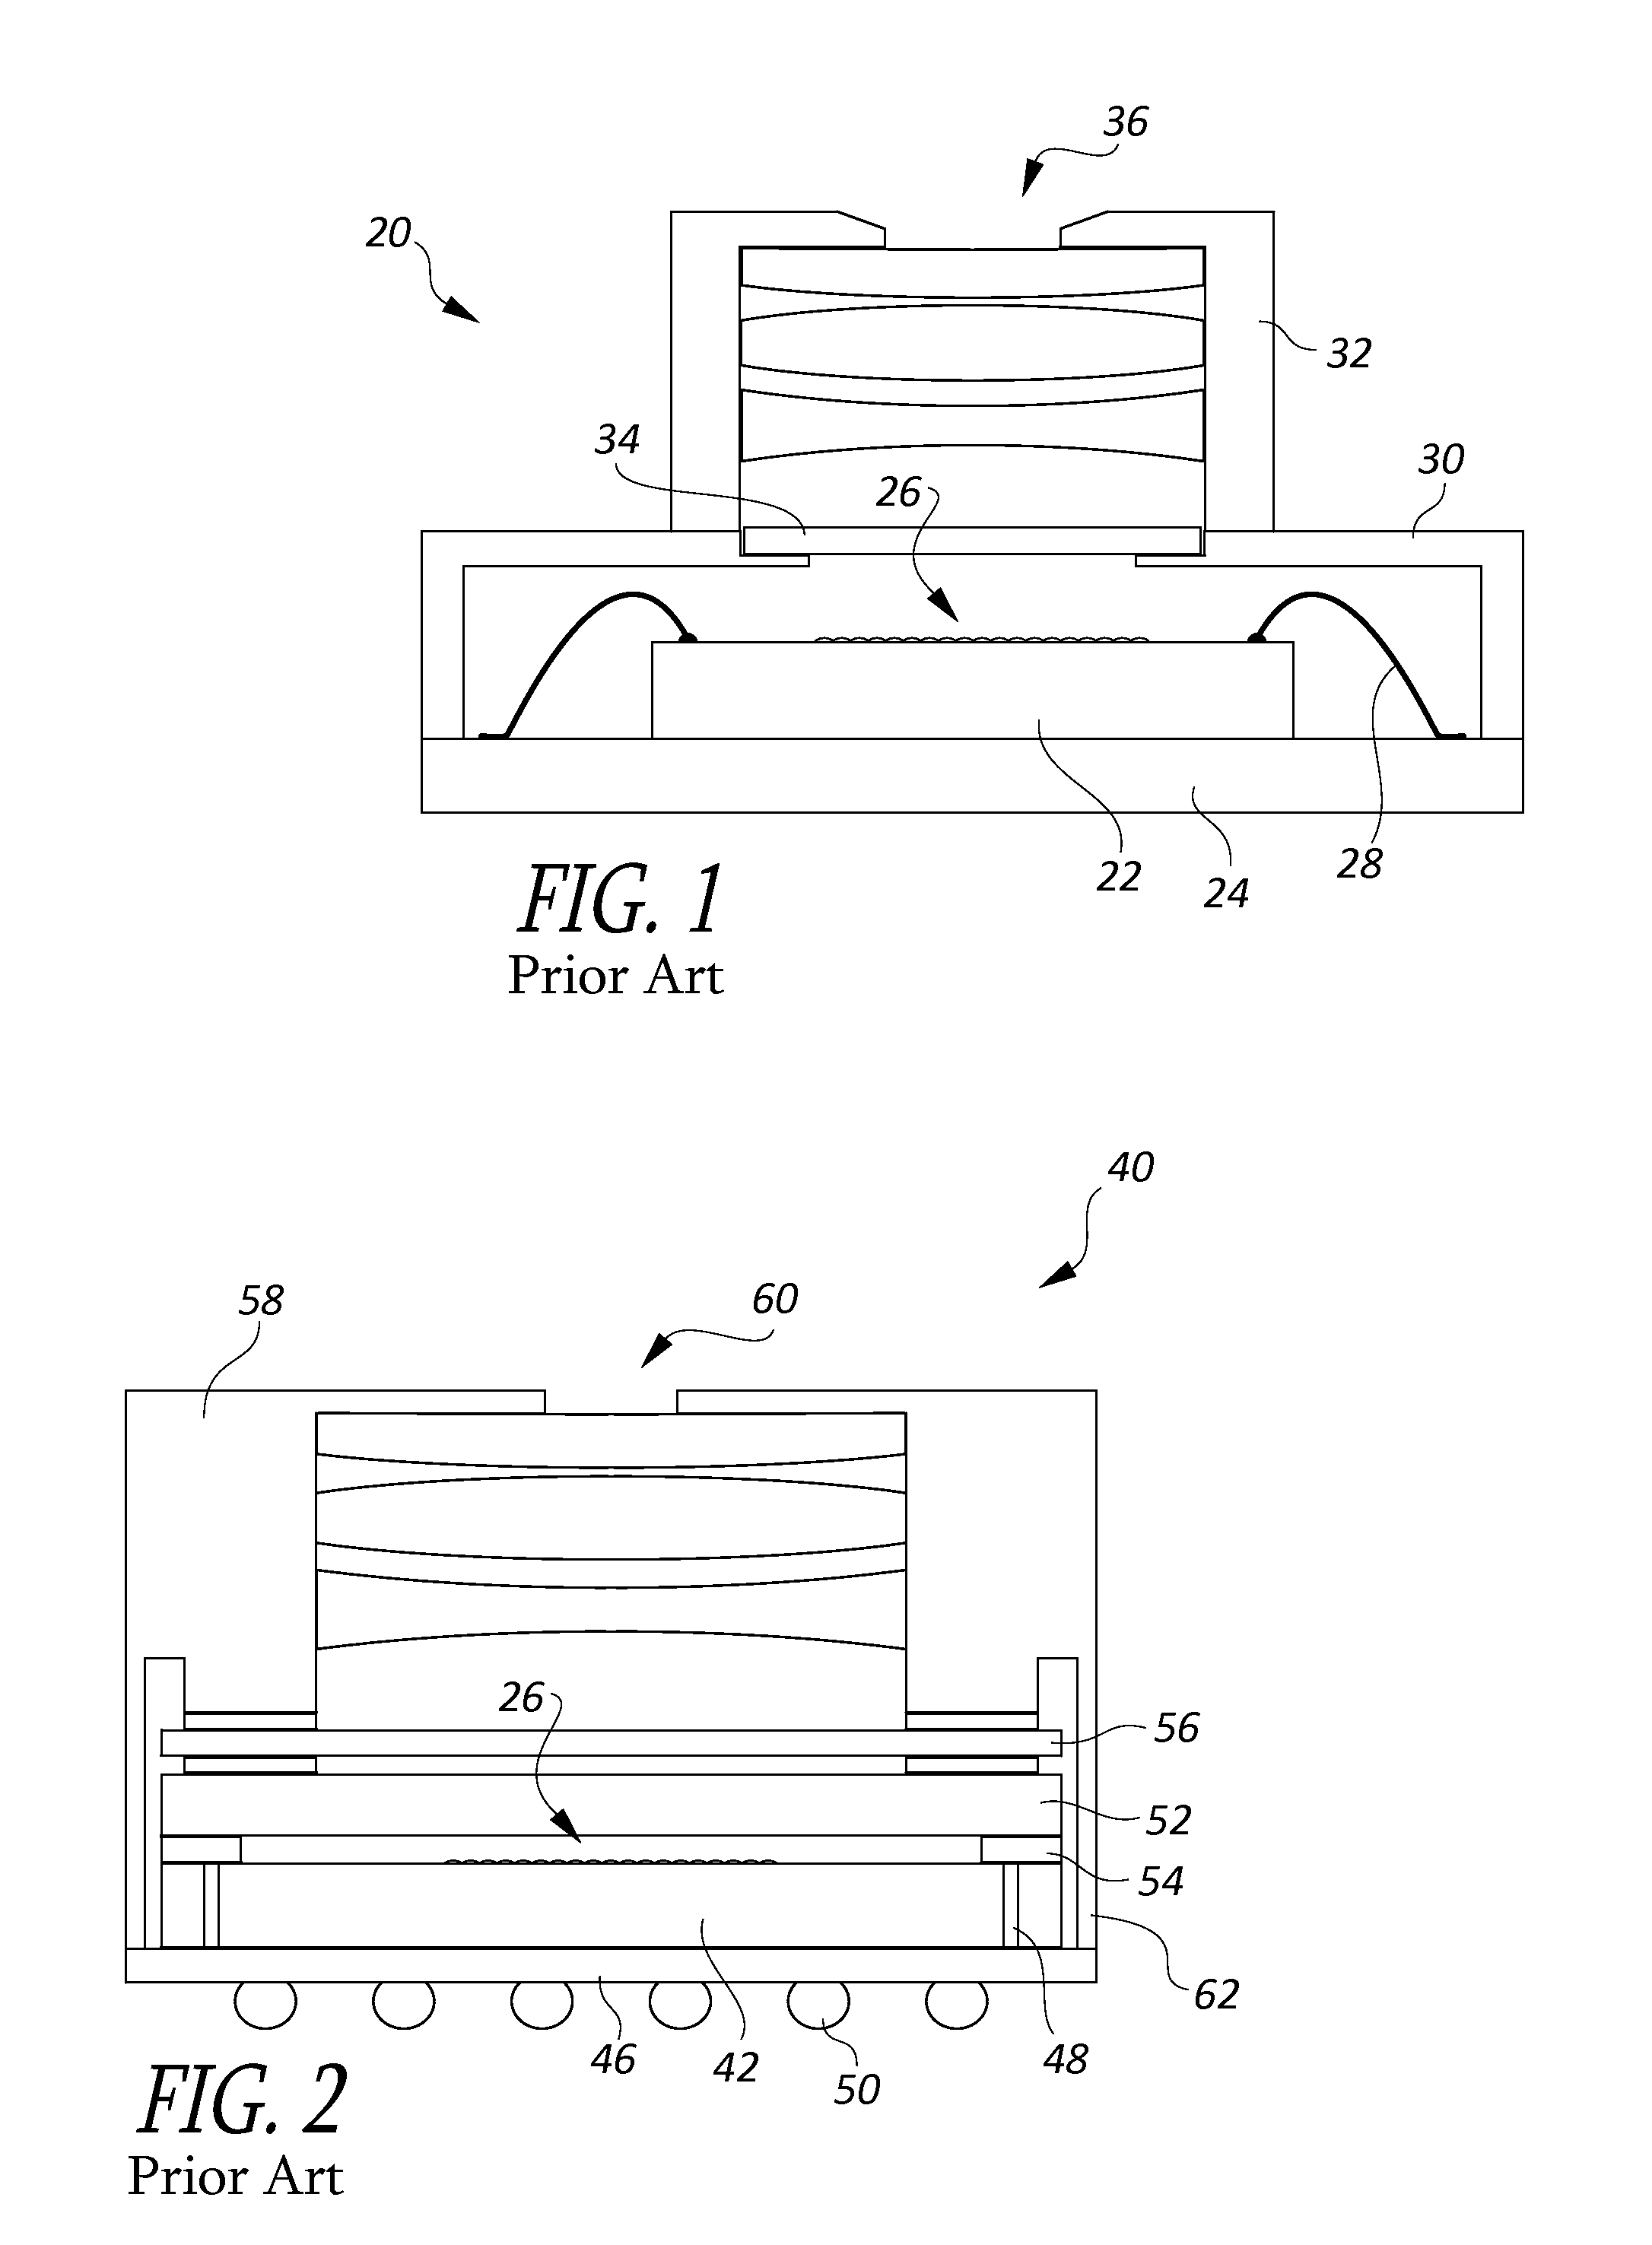 Wafer level optical sensor package and low profile camera module, and method of manufacture